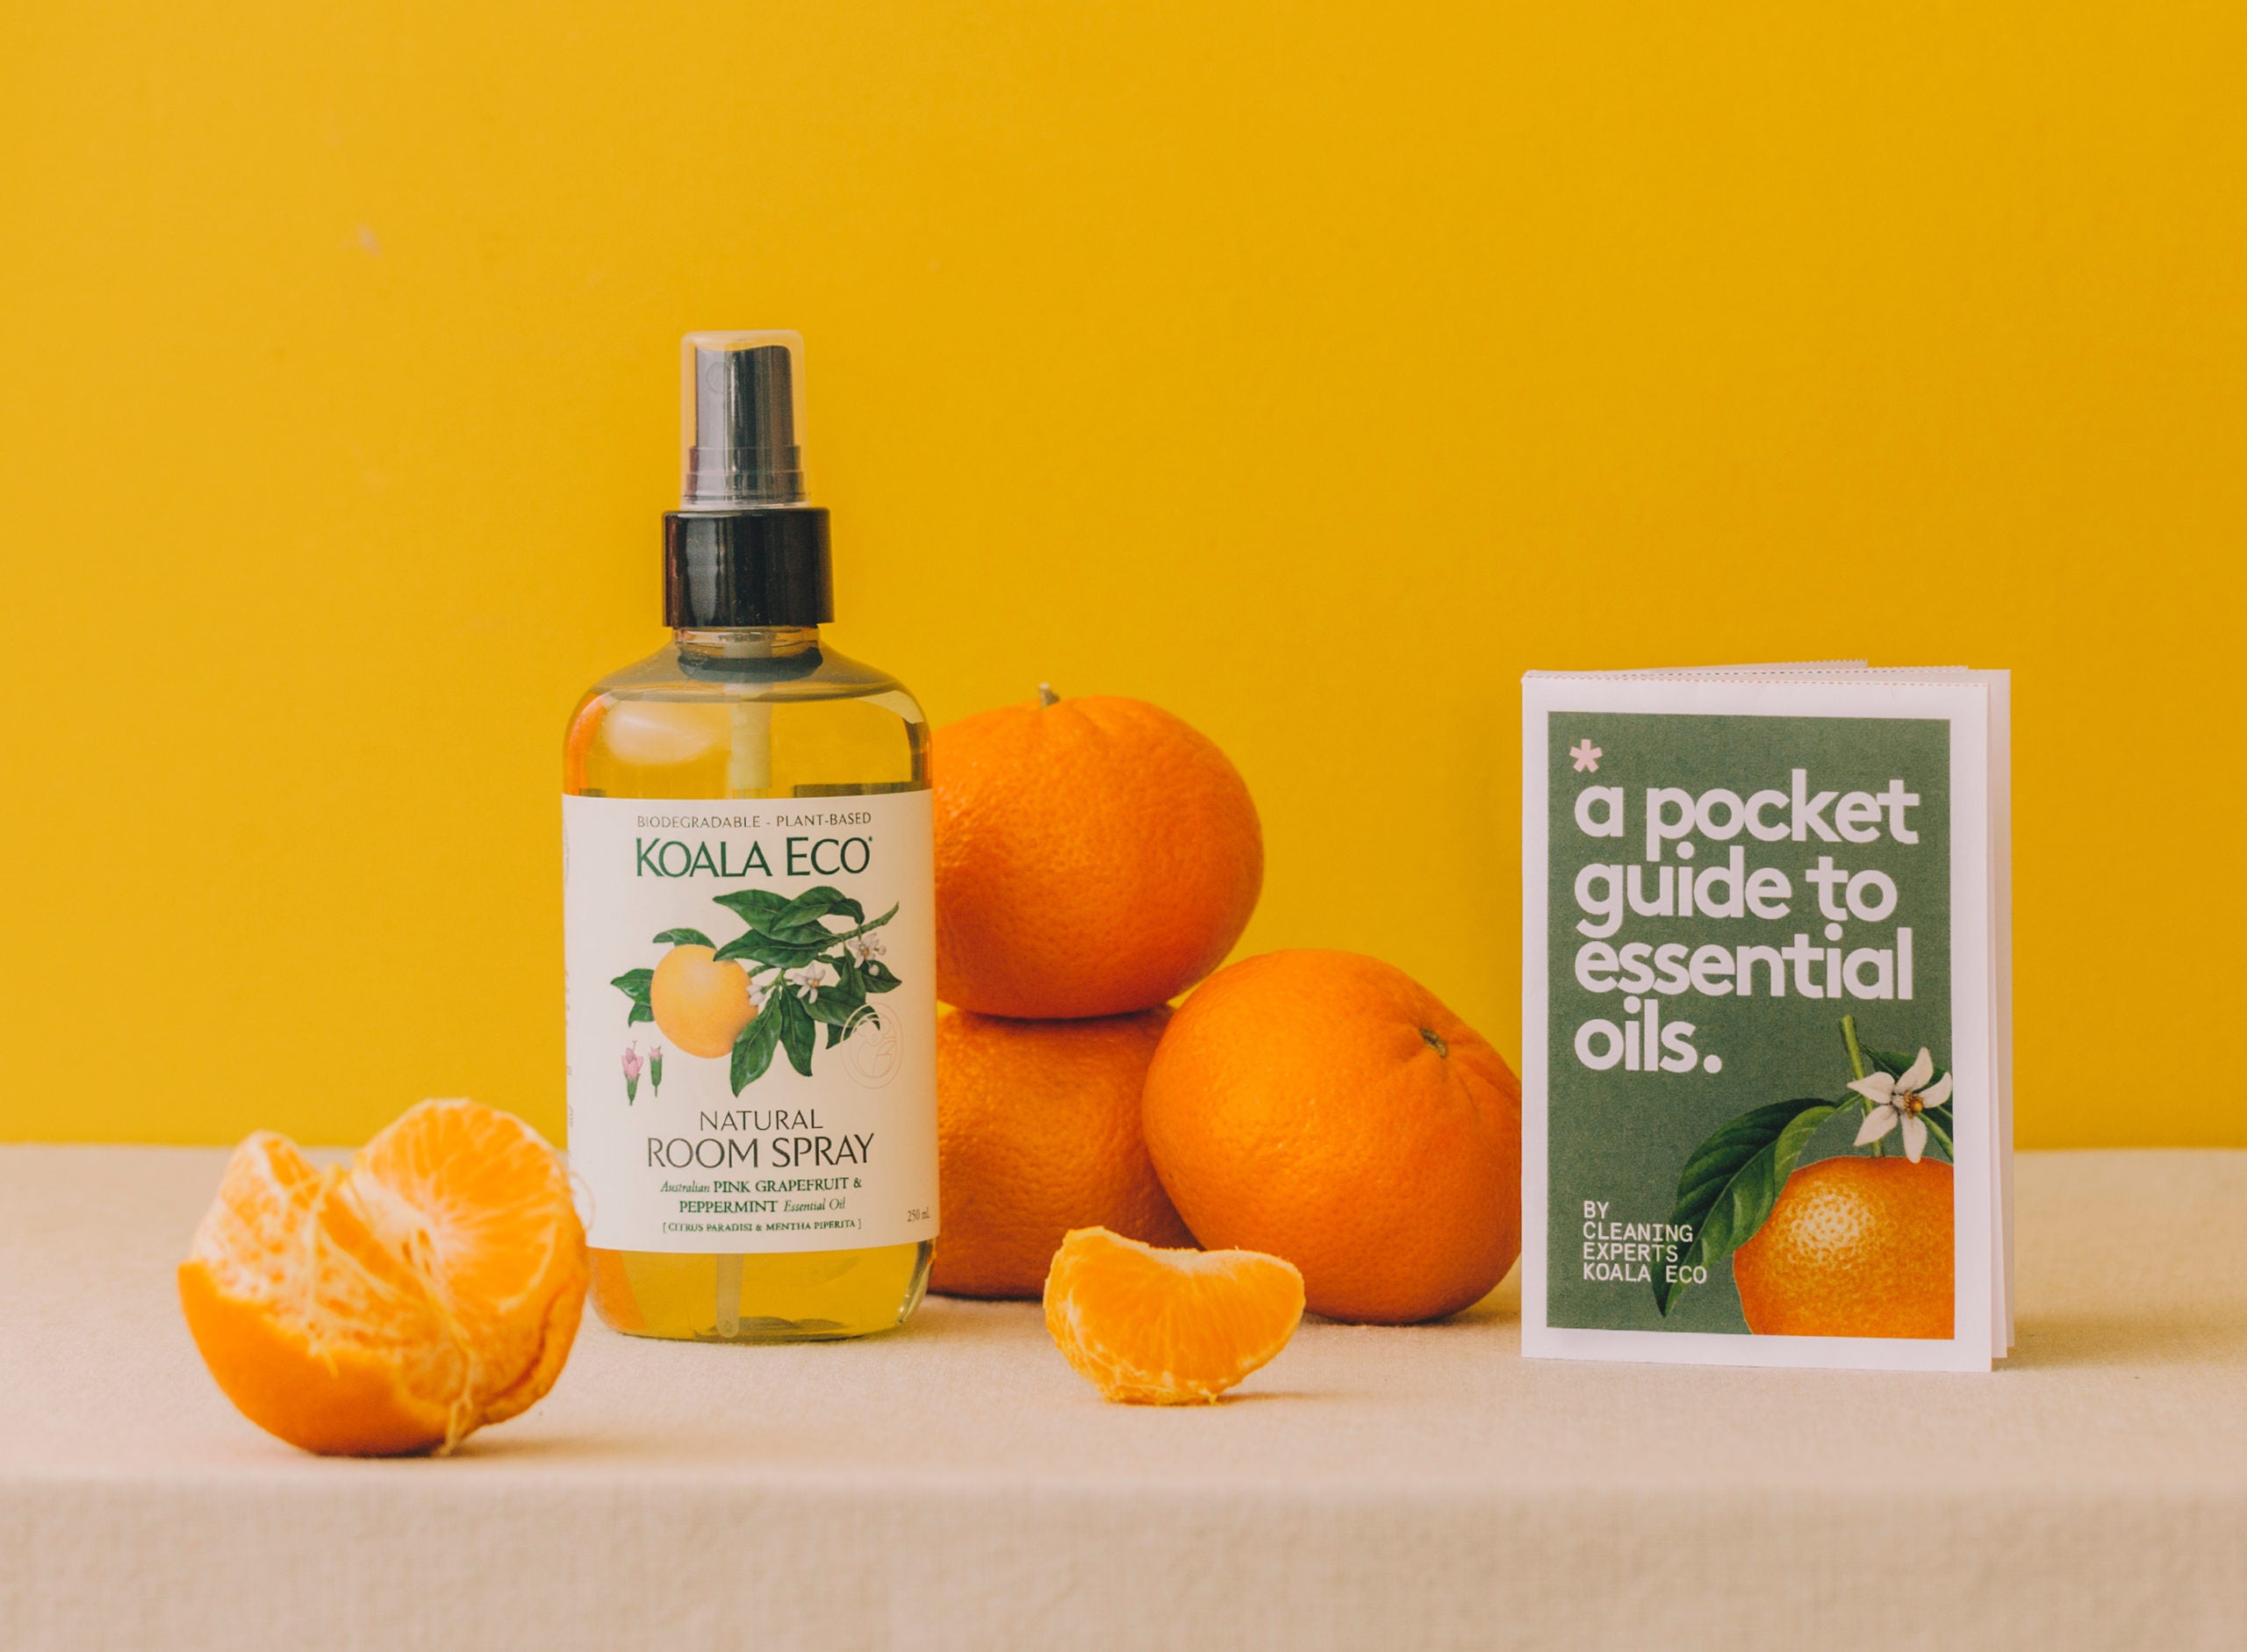 Hello Lunch Lady and Koala Eco - Your pocket guide to essential oils -  Hello Lunch Lady